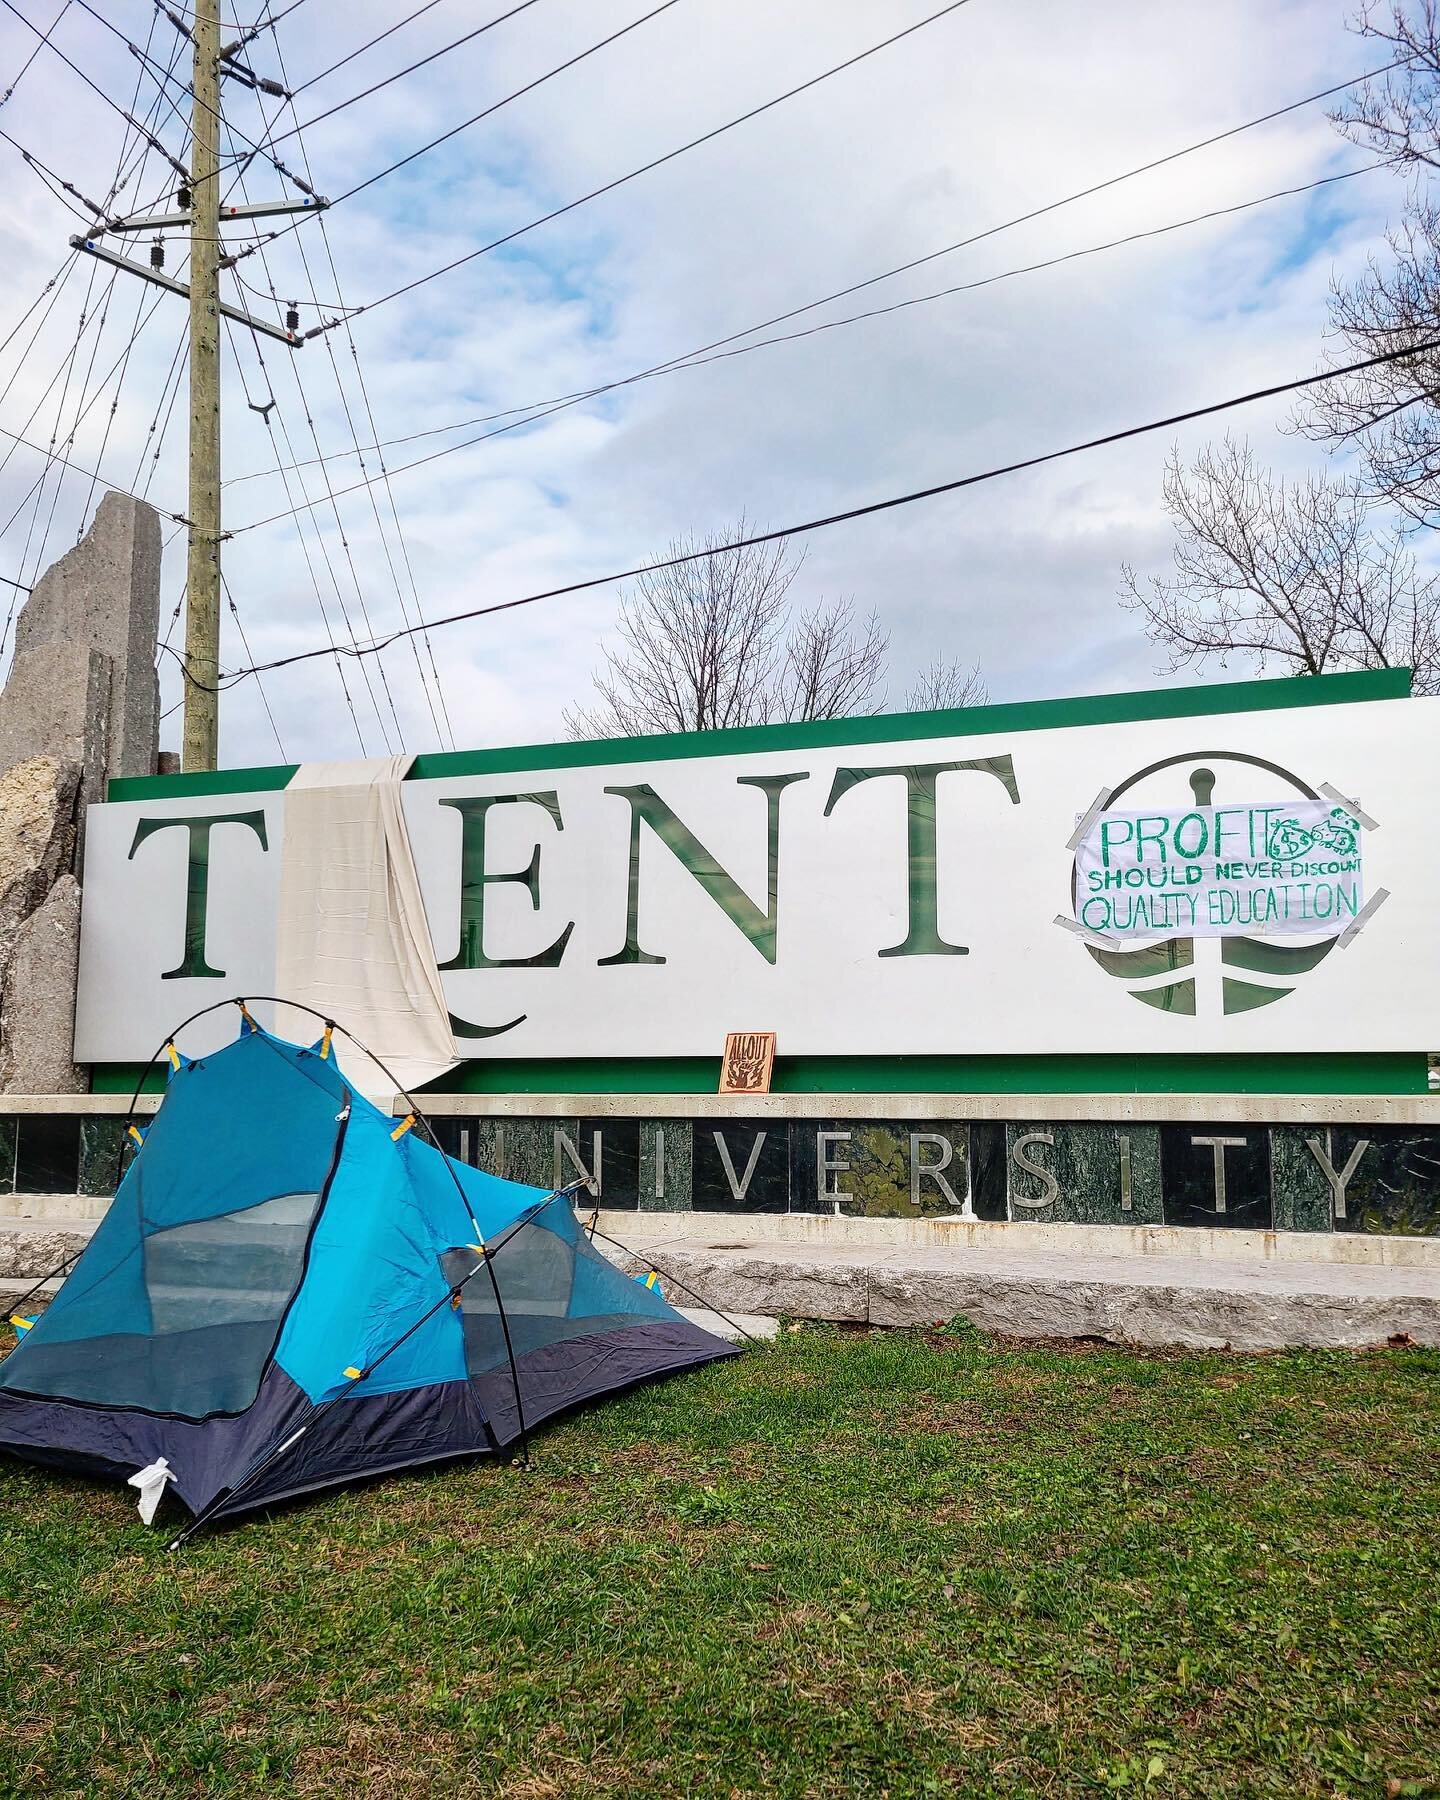 If we don&rsquo;t deal with Rent University it will become Tent University.

Student houselessness is real. The housing crisis must be addressed. The government is responsible for ensuring that students experience their education barrier-free. We des